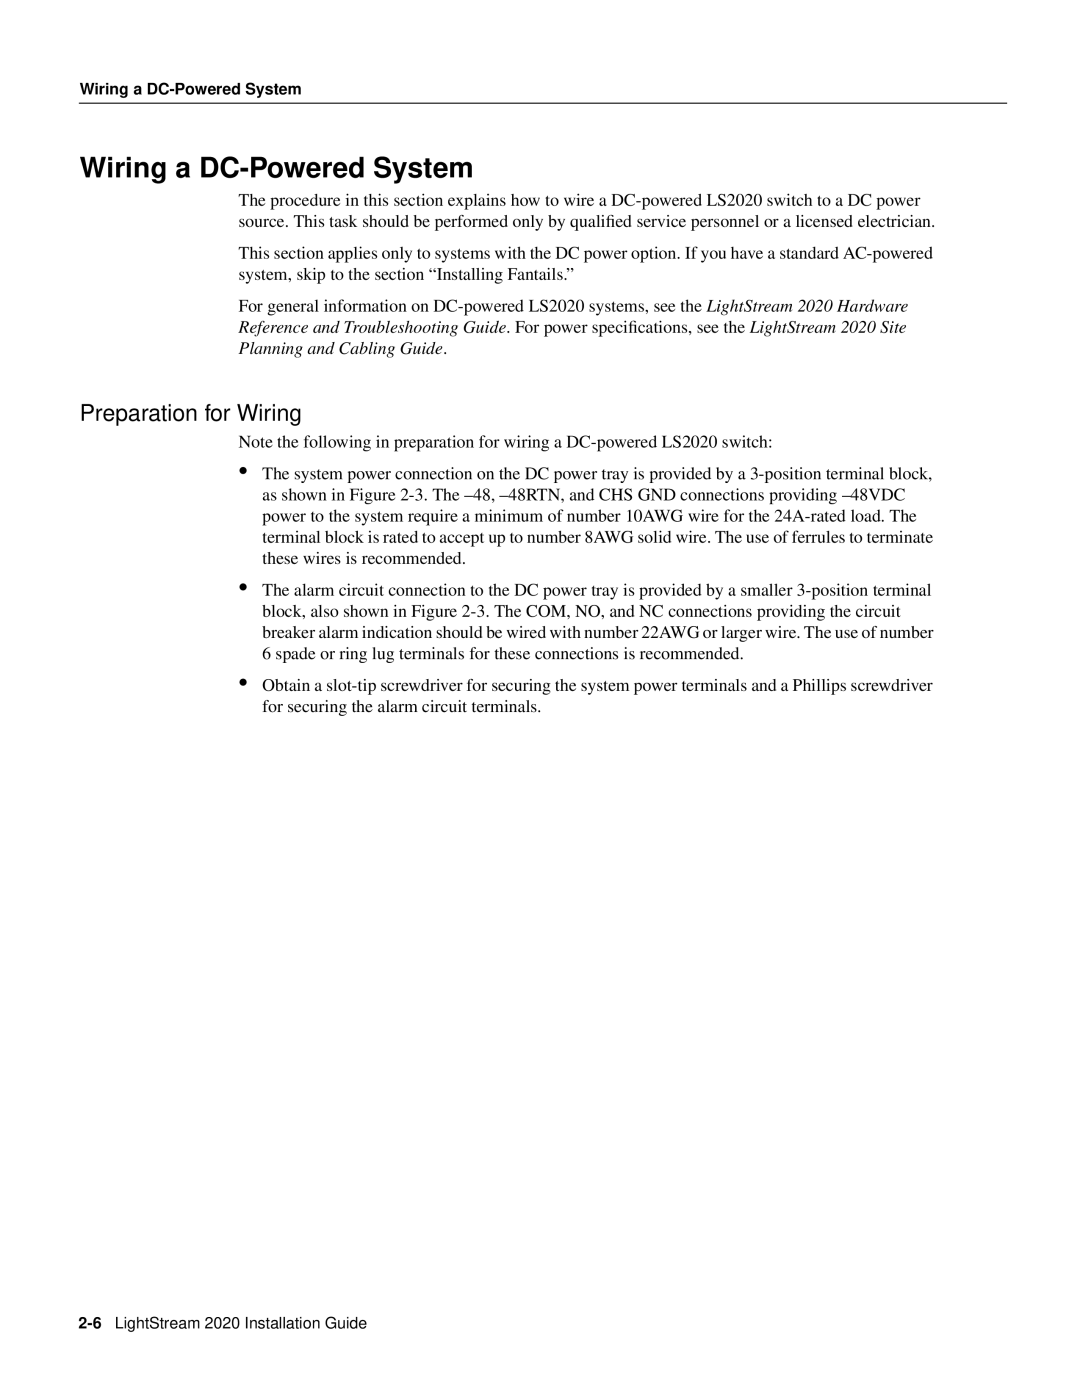 Cisco Systems 2020 manual Wiring a DC-Powered System, Preparation for Wiring 